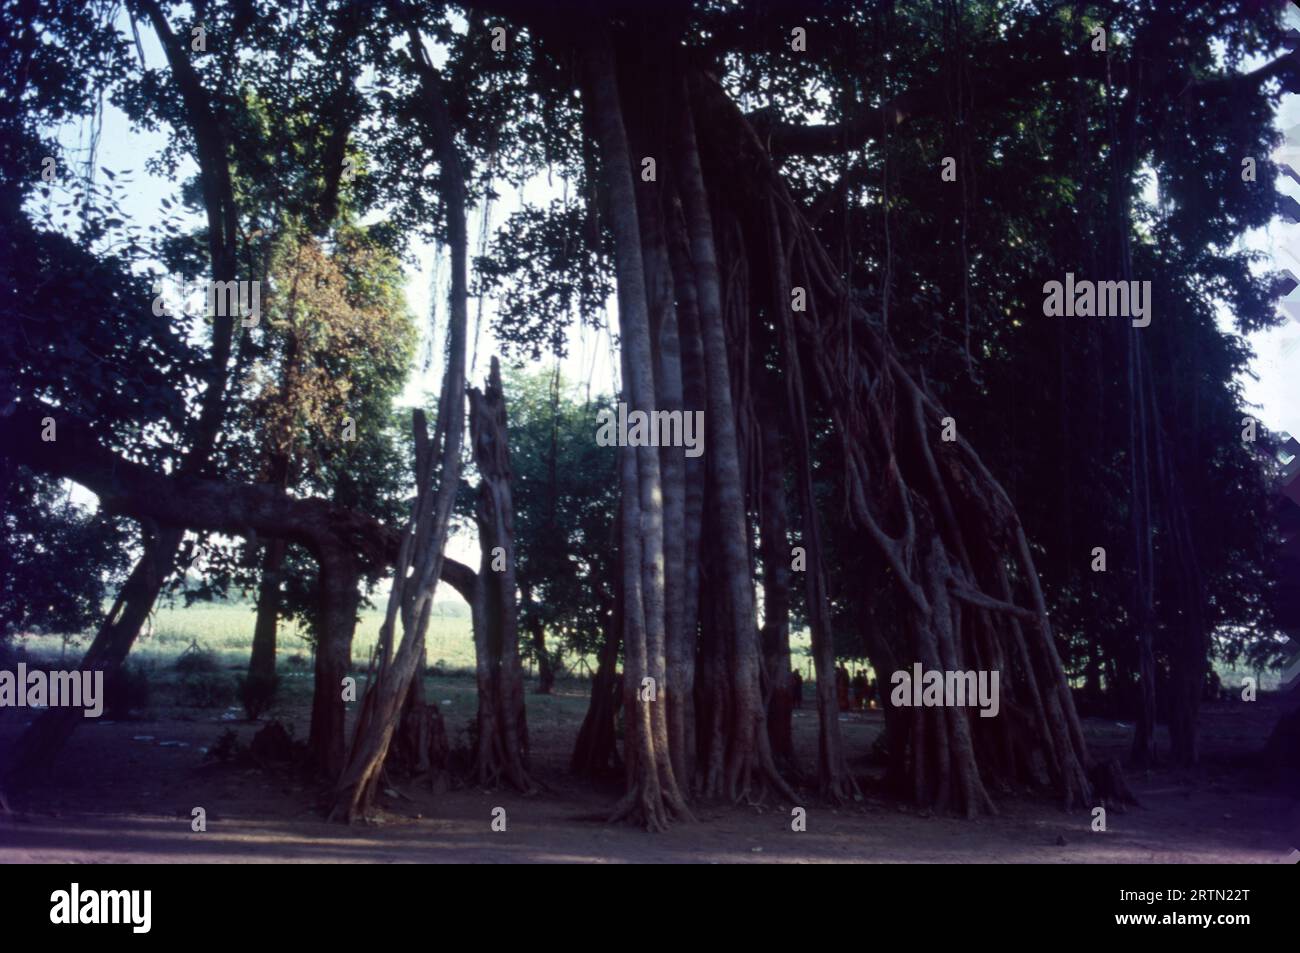 Kabirwad is a famous place situated on an island in the middle of the river Narmada. The place is named after the famous Saint Kabir  It also has an imposing Kabir Temple, Visitors enjoy the solitude and sanctity offered by this huge banyan tree. 600 years Old, Spread over 2.5 Acres of land. Stock Photo